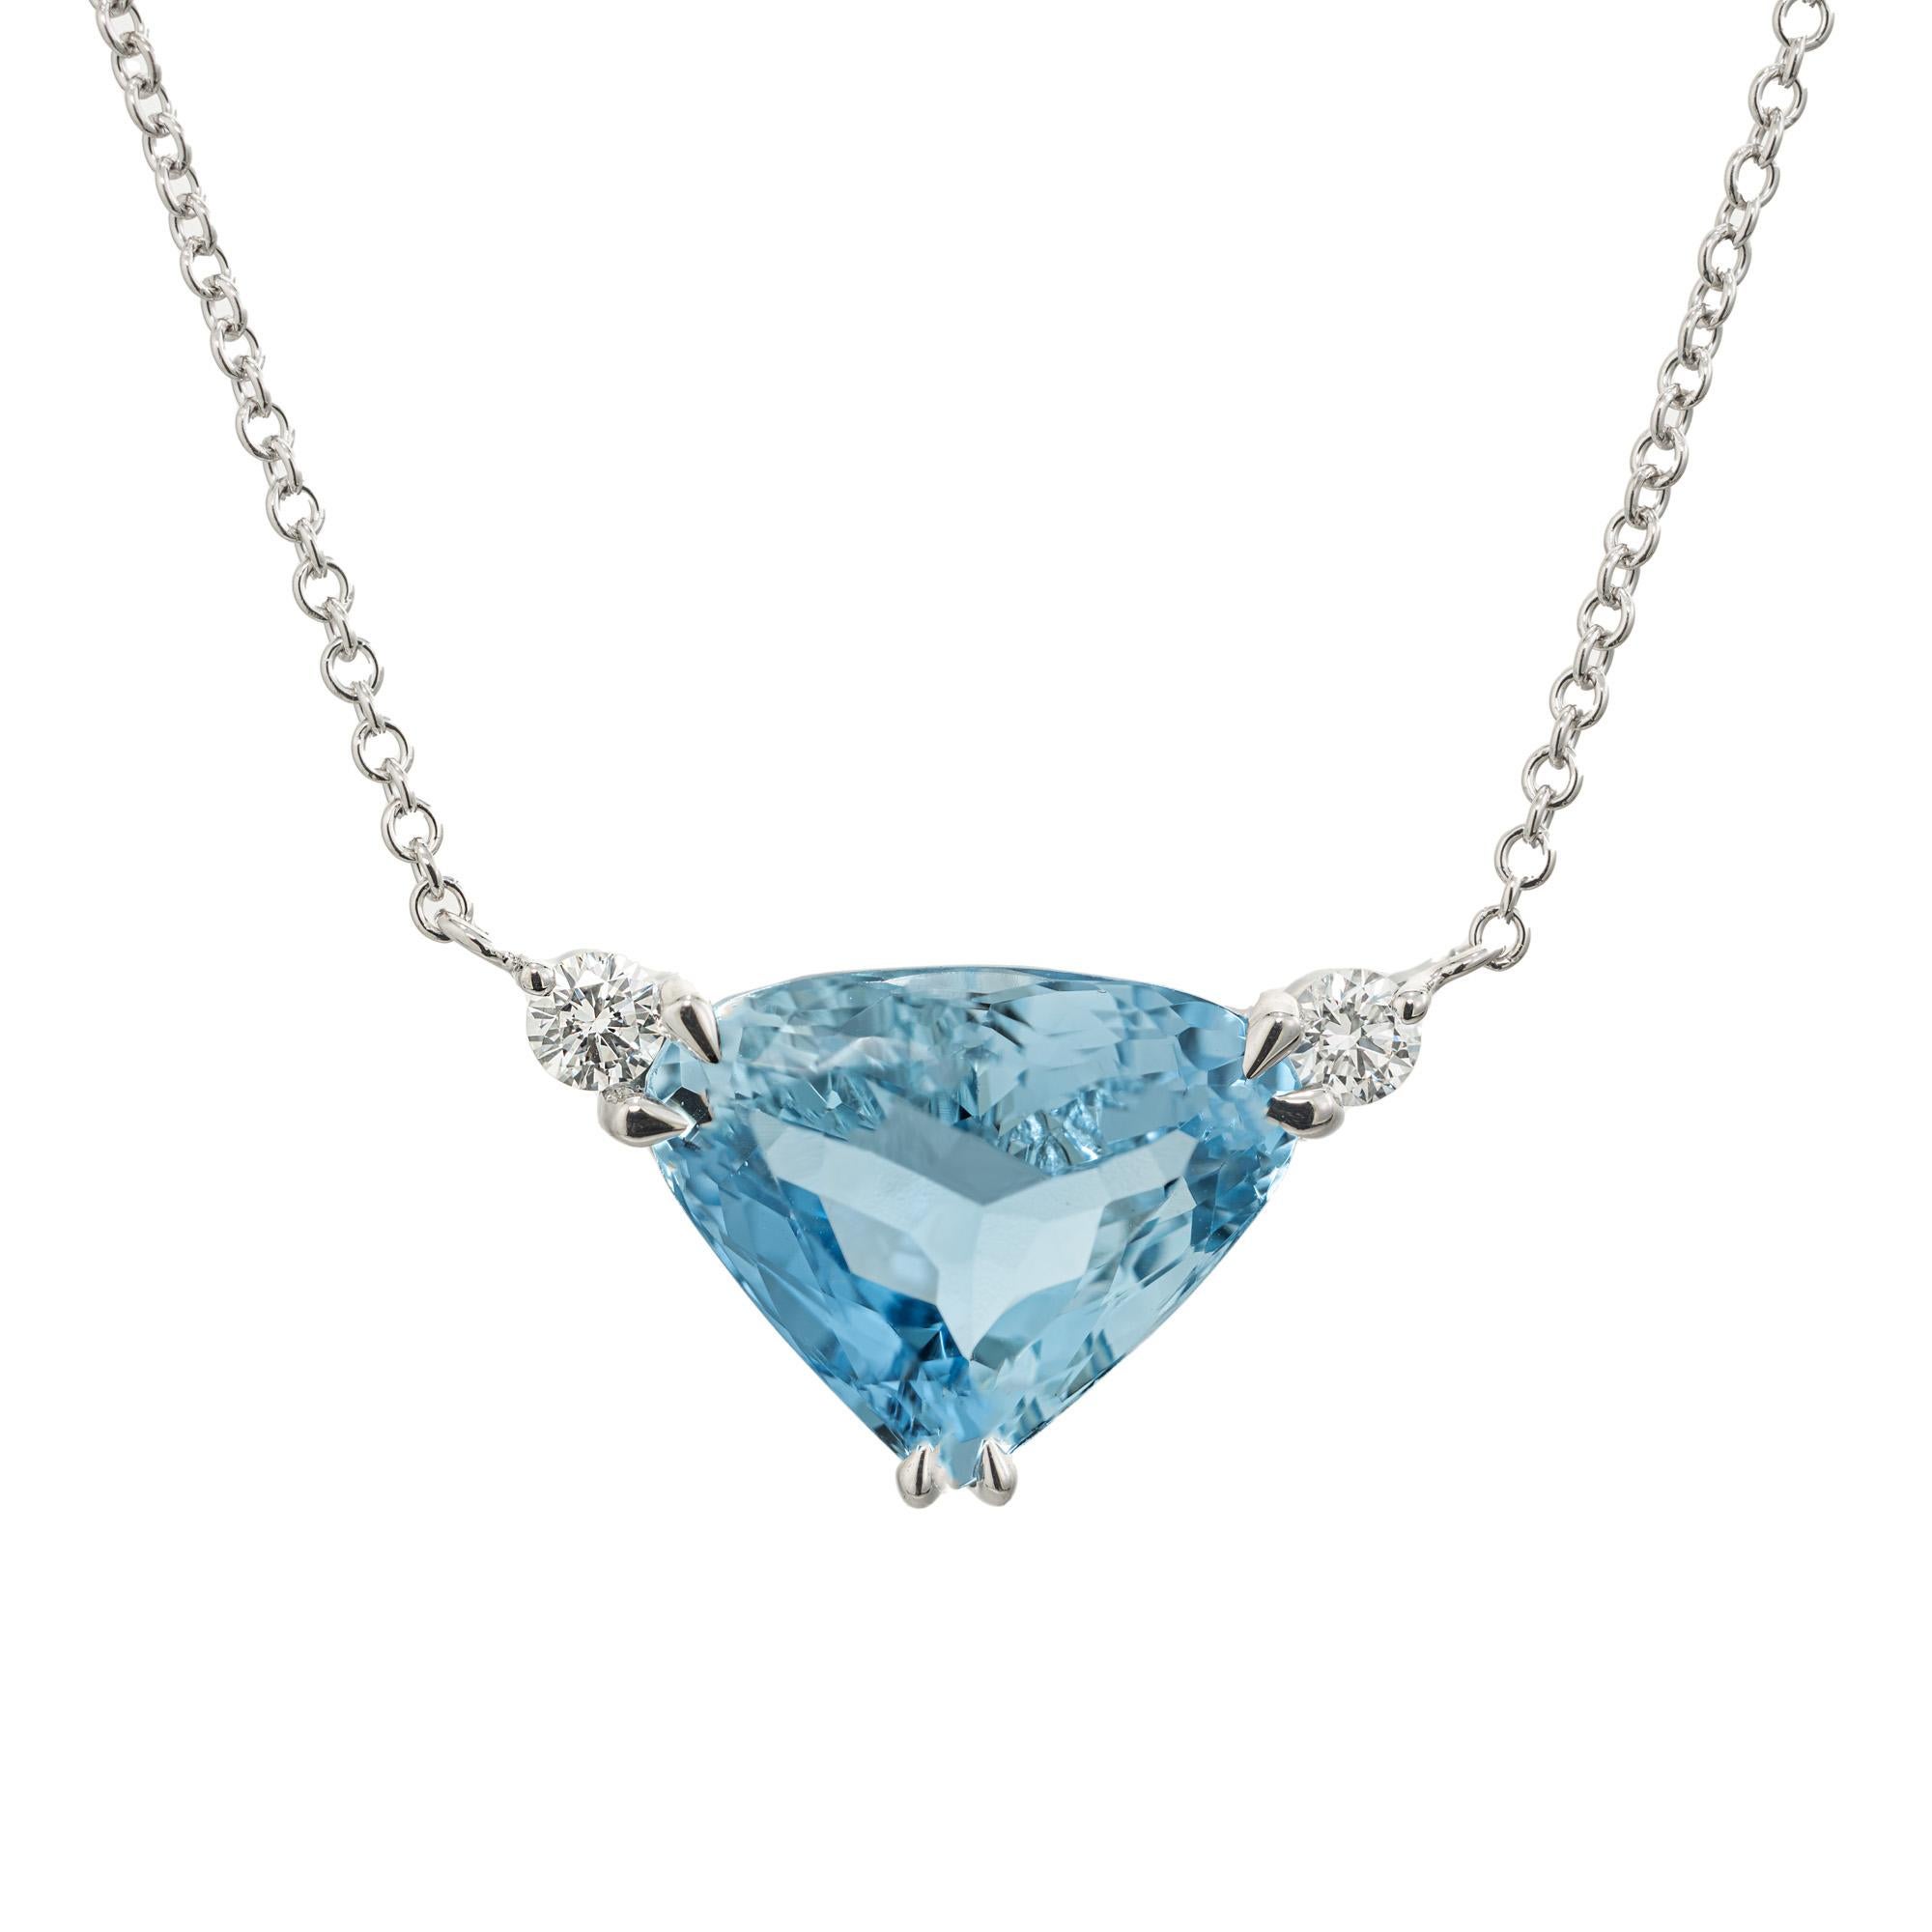 Aqua and diamond pendant necklace. Triangular shape 4.94ct. aquamarine set in 14k white gold with 2 round brilliant cut accent diamonds. 18 inch 14k white gold chain. A captivating piece that effortlessly combines elegance and sophistication.